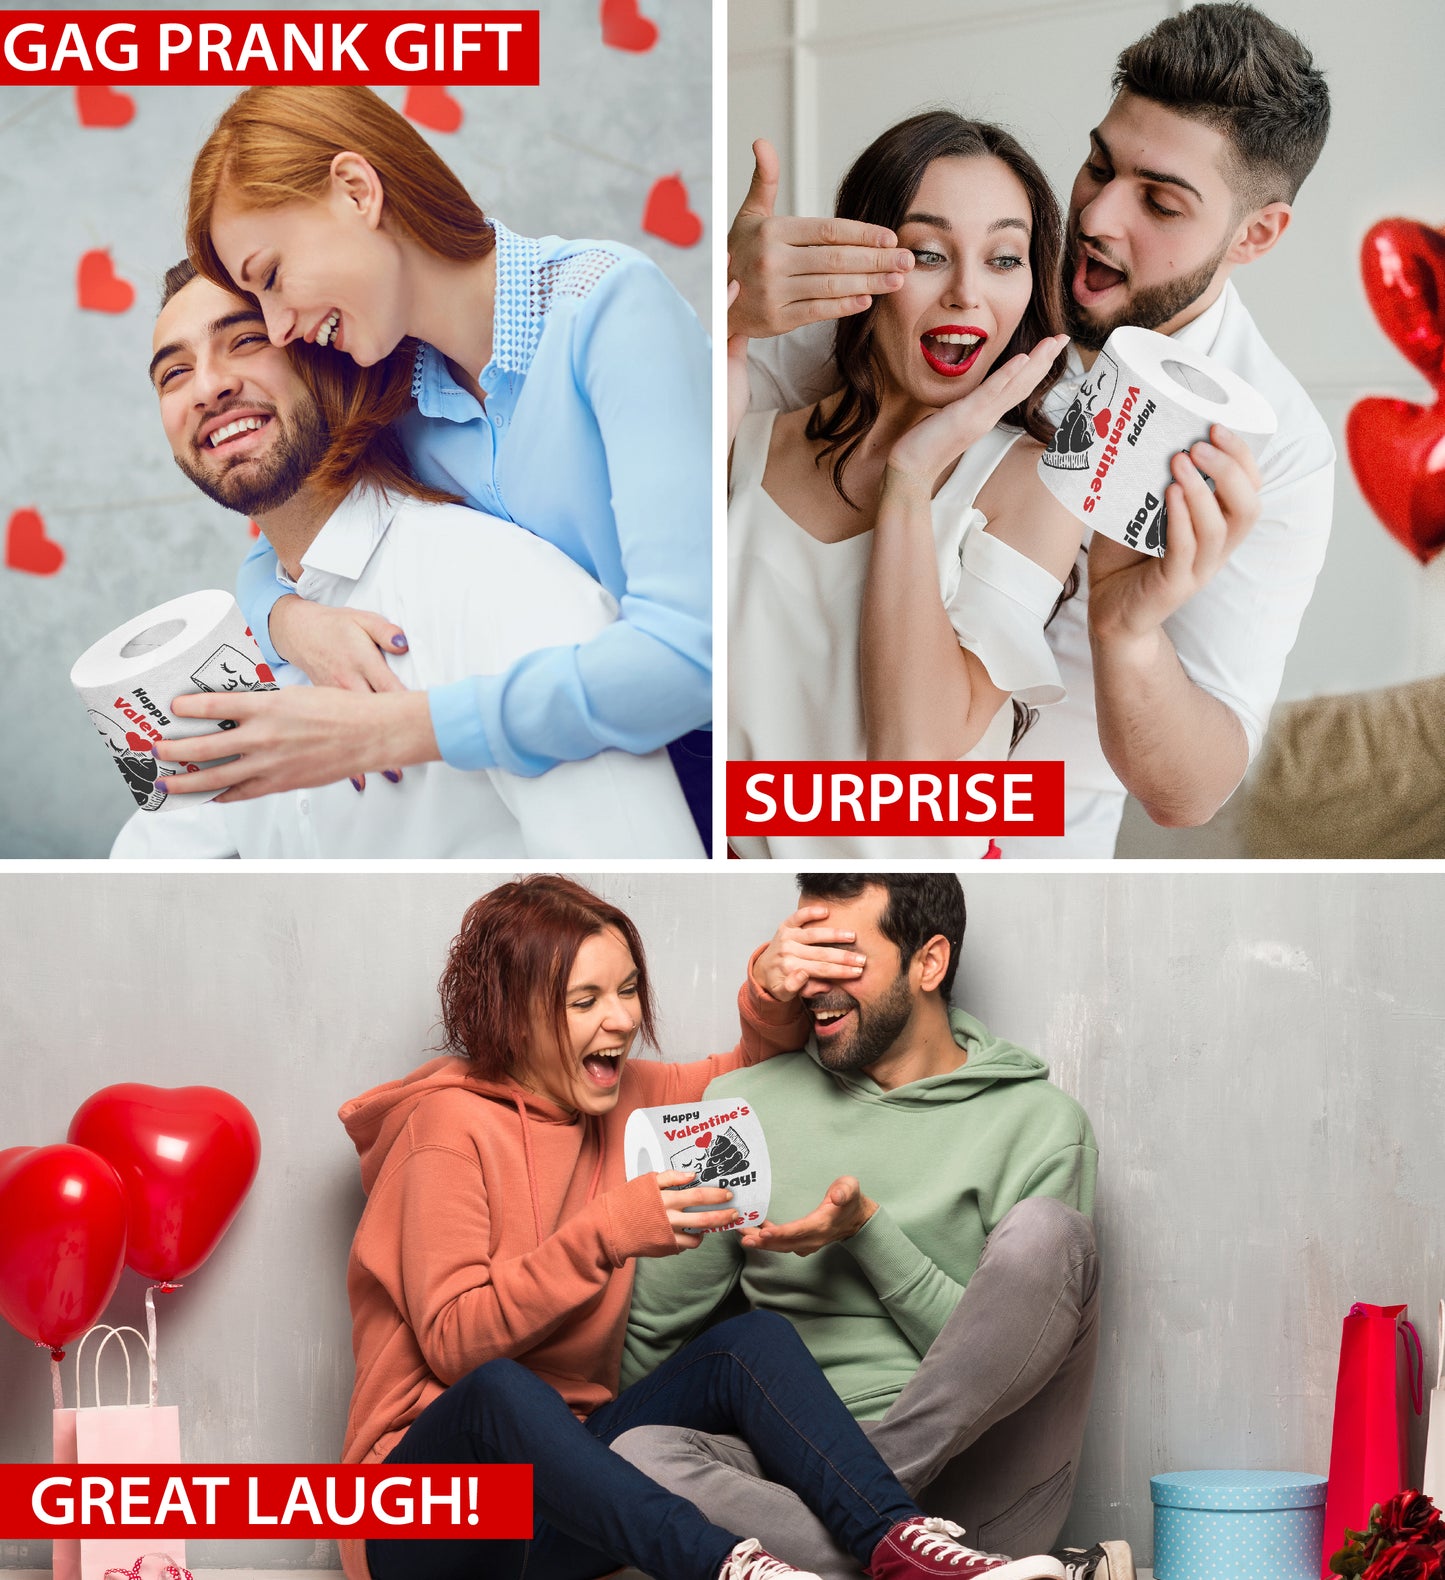 Printed TP Happy Valentine's Printed Toilet Paper Funny Gag Gift - 500 Sheets